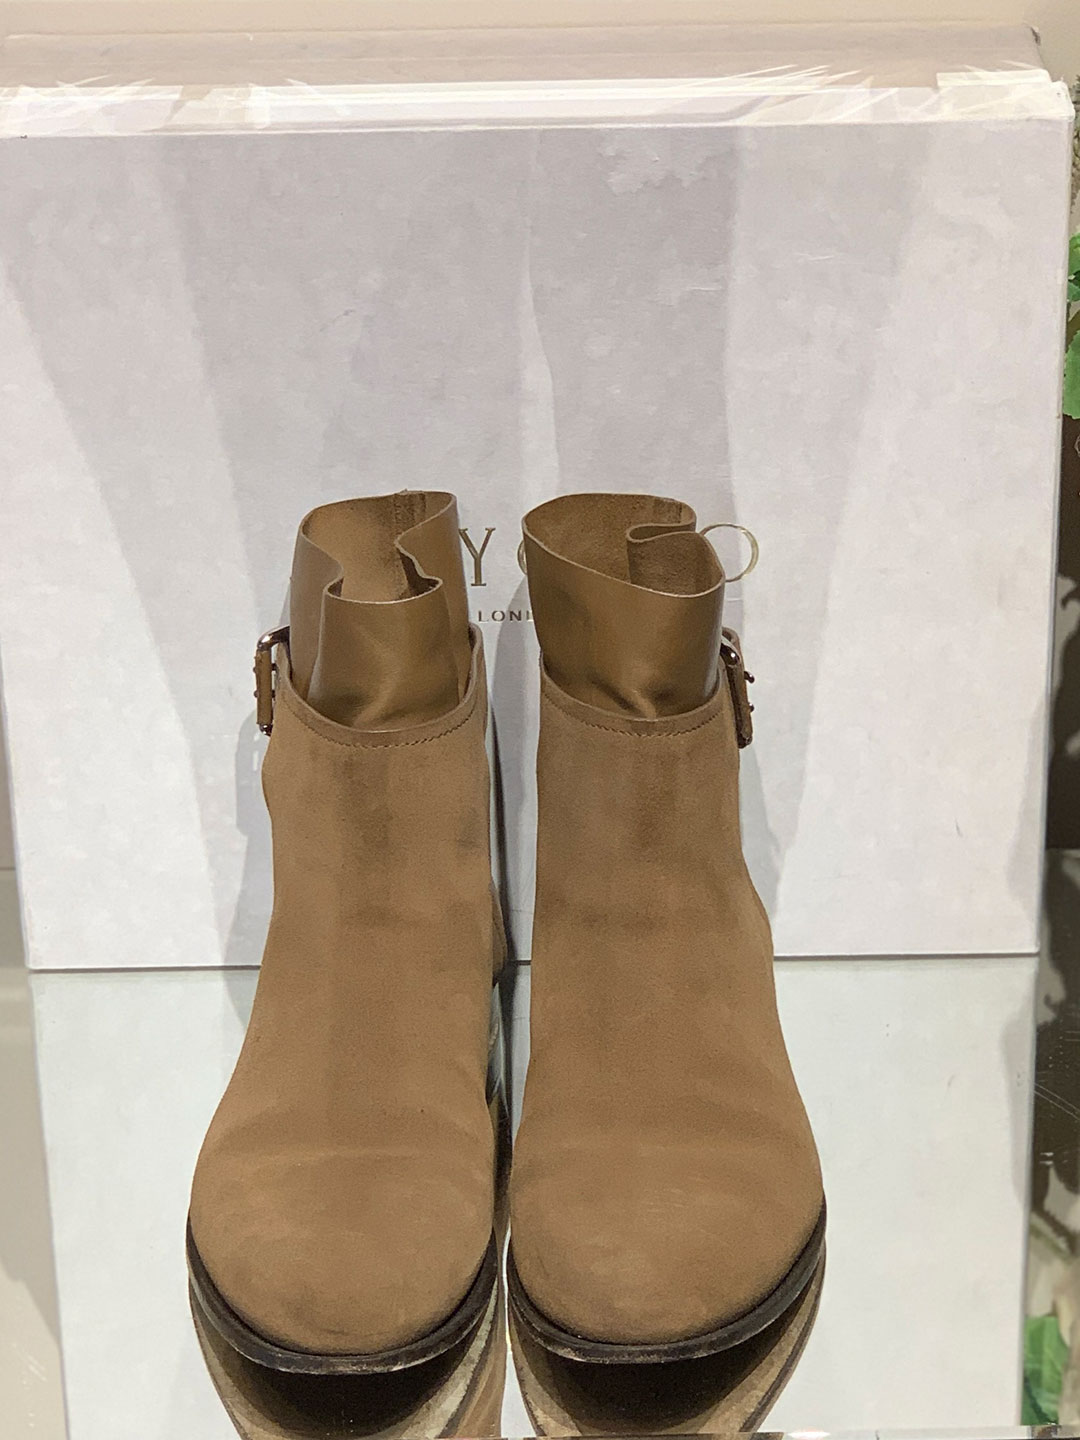 Jimmy Choo Tan Ankle Boots Size 39 (UK 6) - Dress Cheshire | Preloved ...